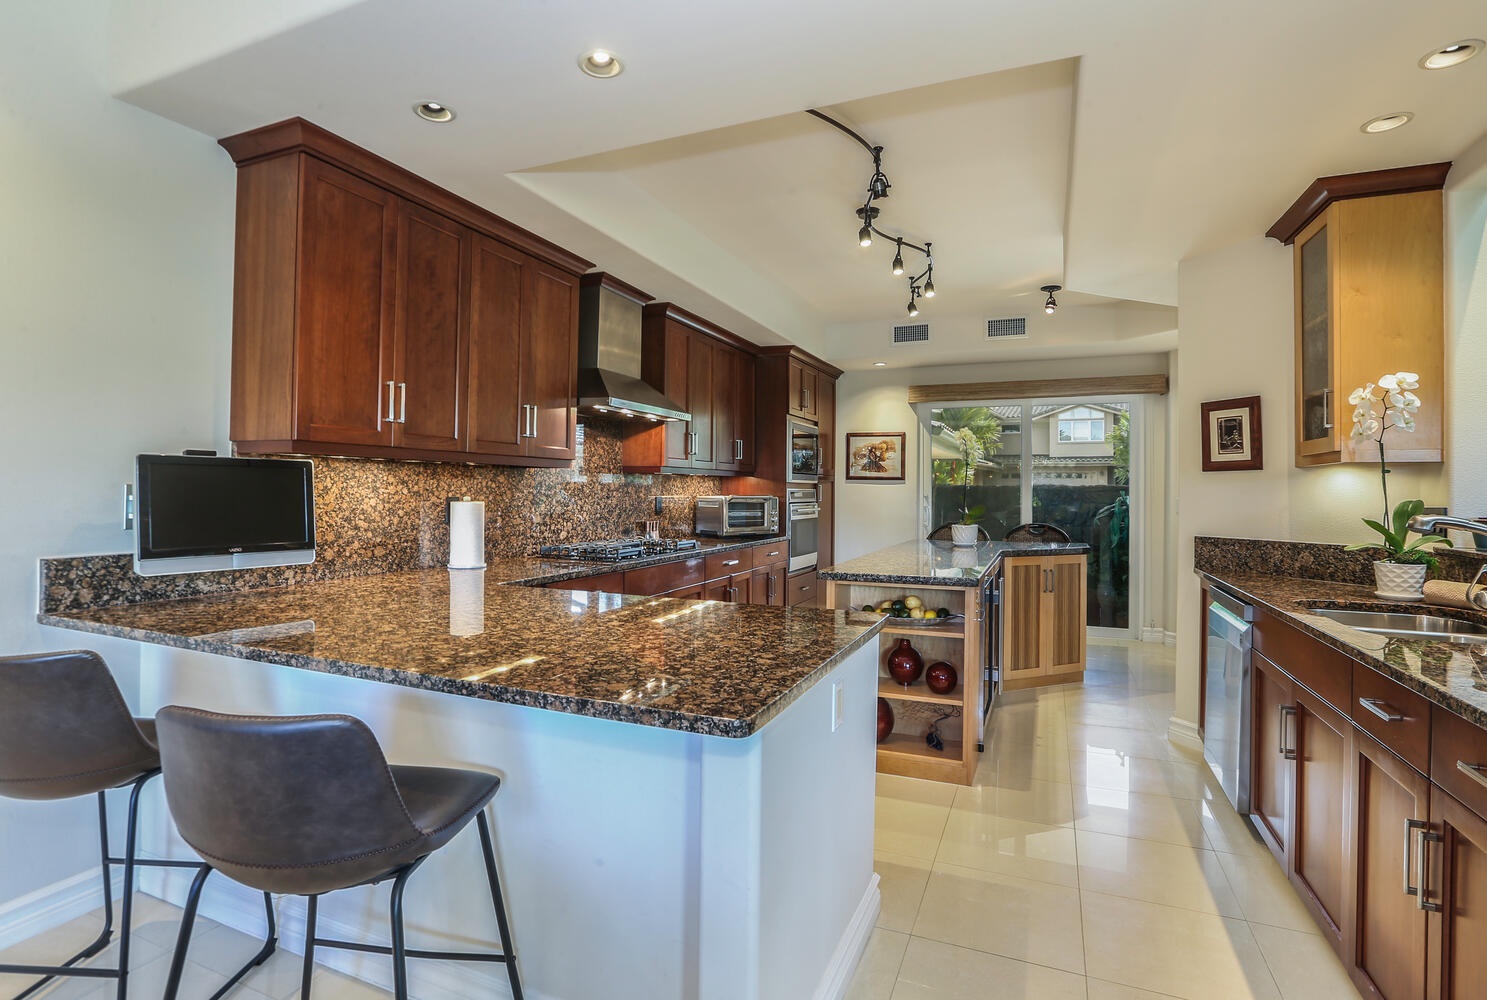 Princeville Vacation Rentals, Hale Moana - Lots of counter space to prepare delicious meals